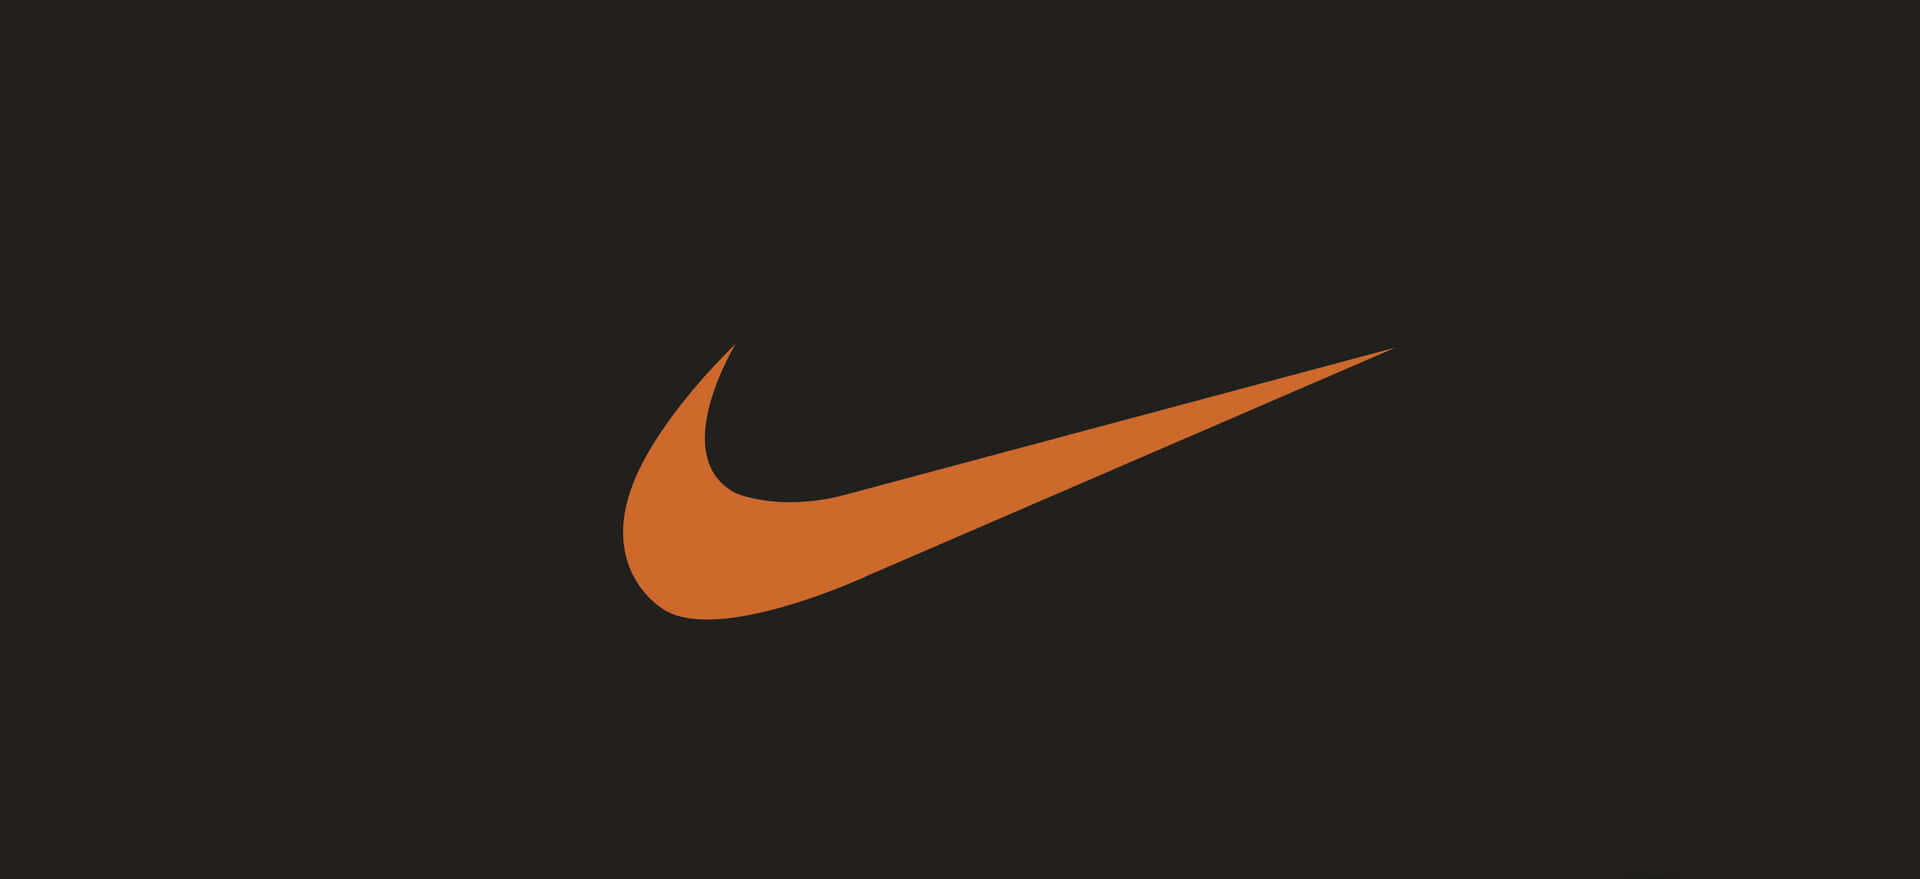 Nike's Legacy - A Journey Of Success